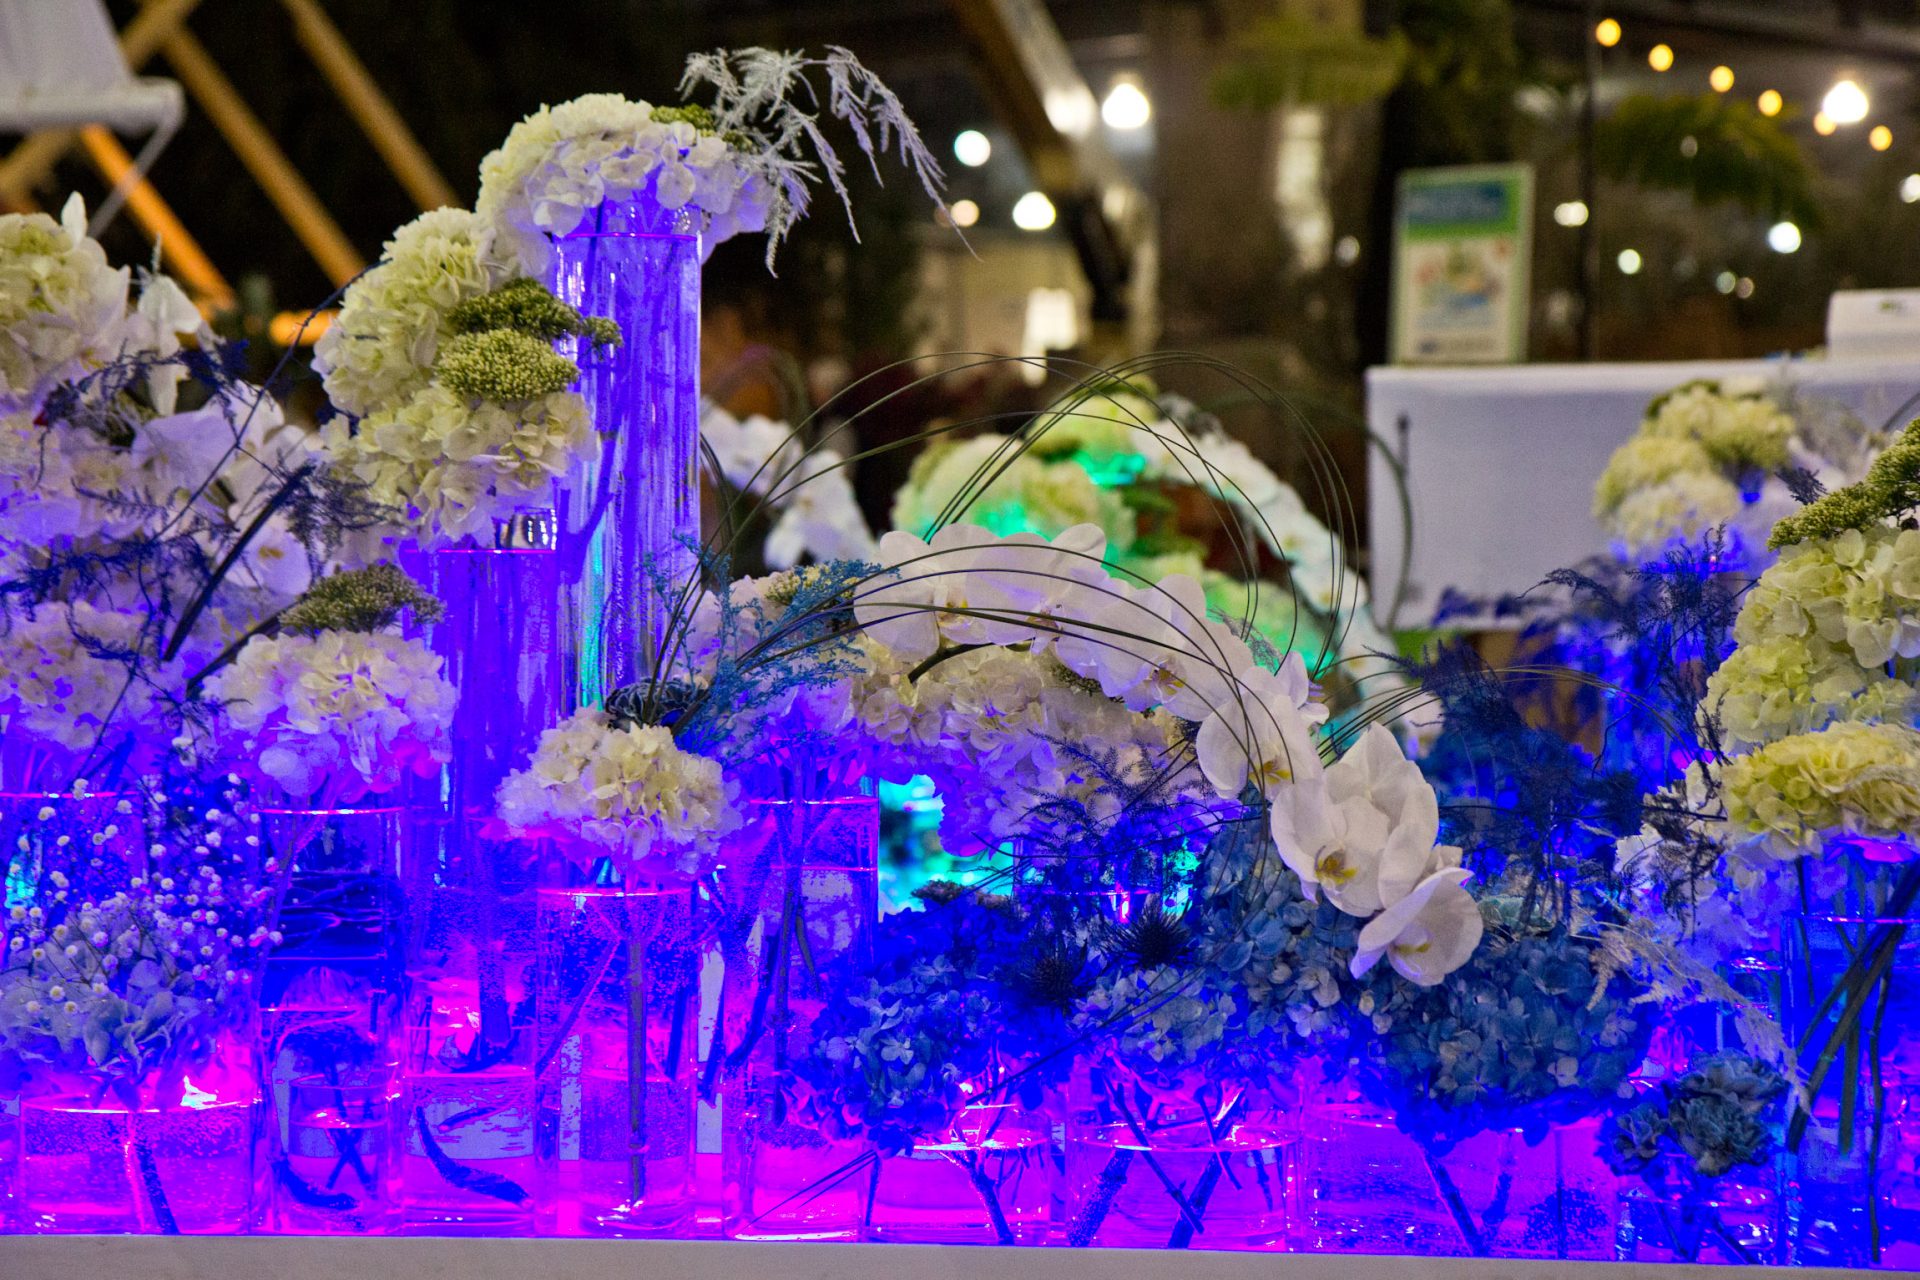 “On the Sea” a design by Haddonfield’s Arrange, Floral and Event Design, being built Thursday at the 2020 Flower Show.